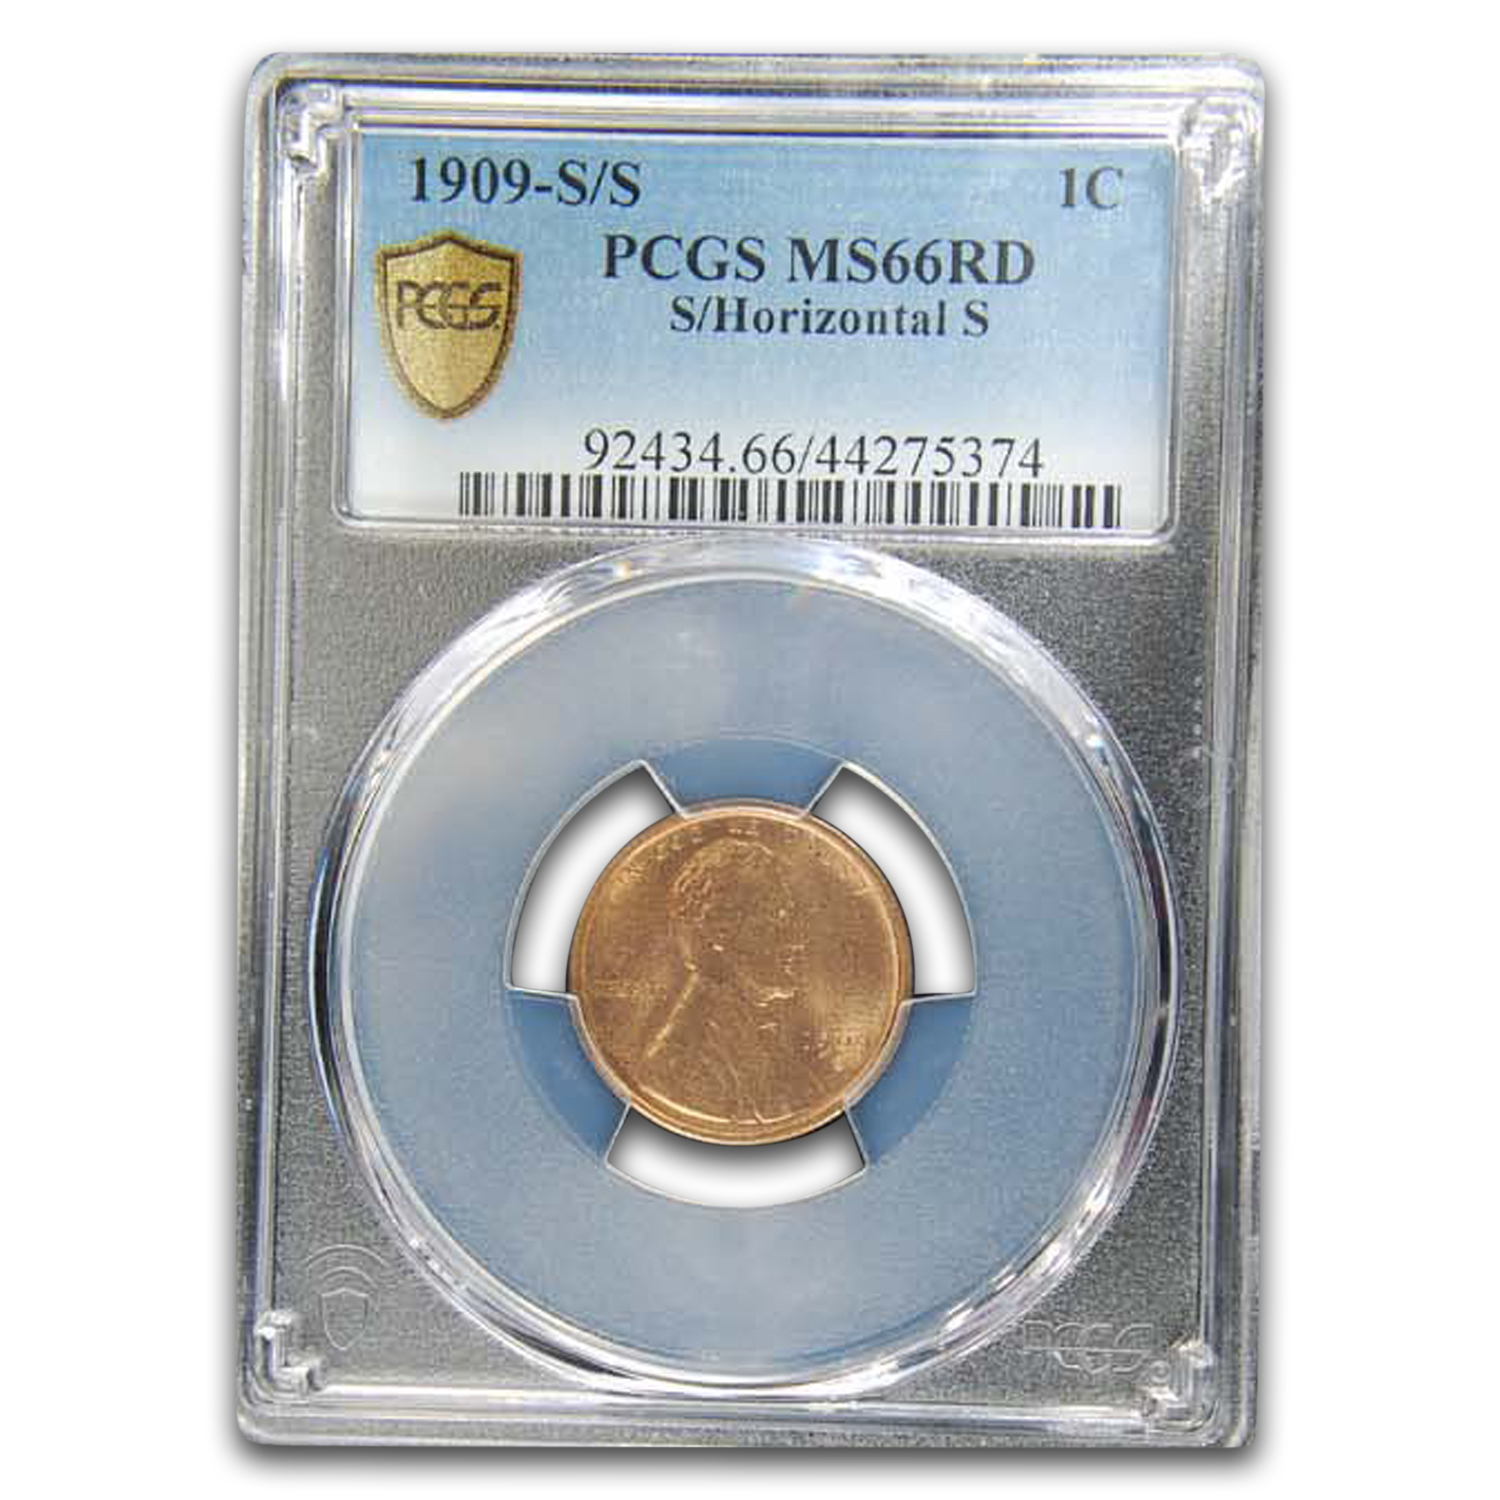 Buy 1909-S/S Lincoln Cent MS-66 PCGS (Red, S/Horizontal S)